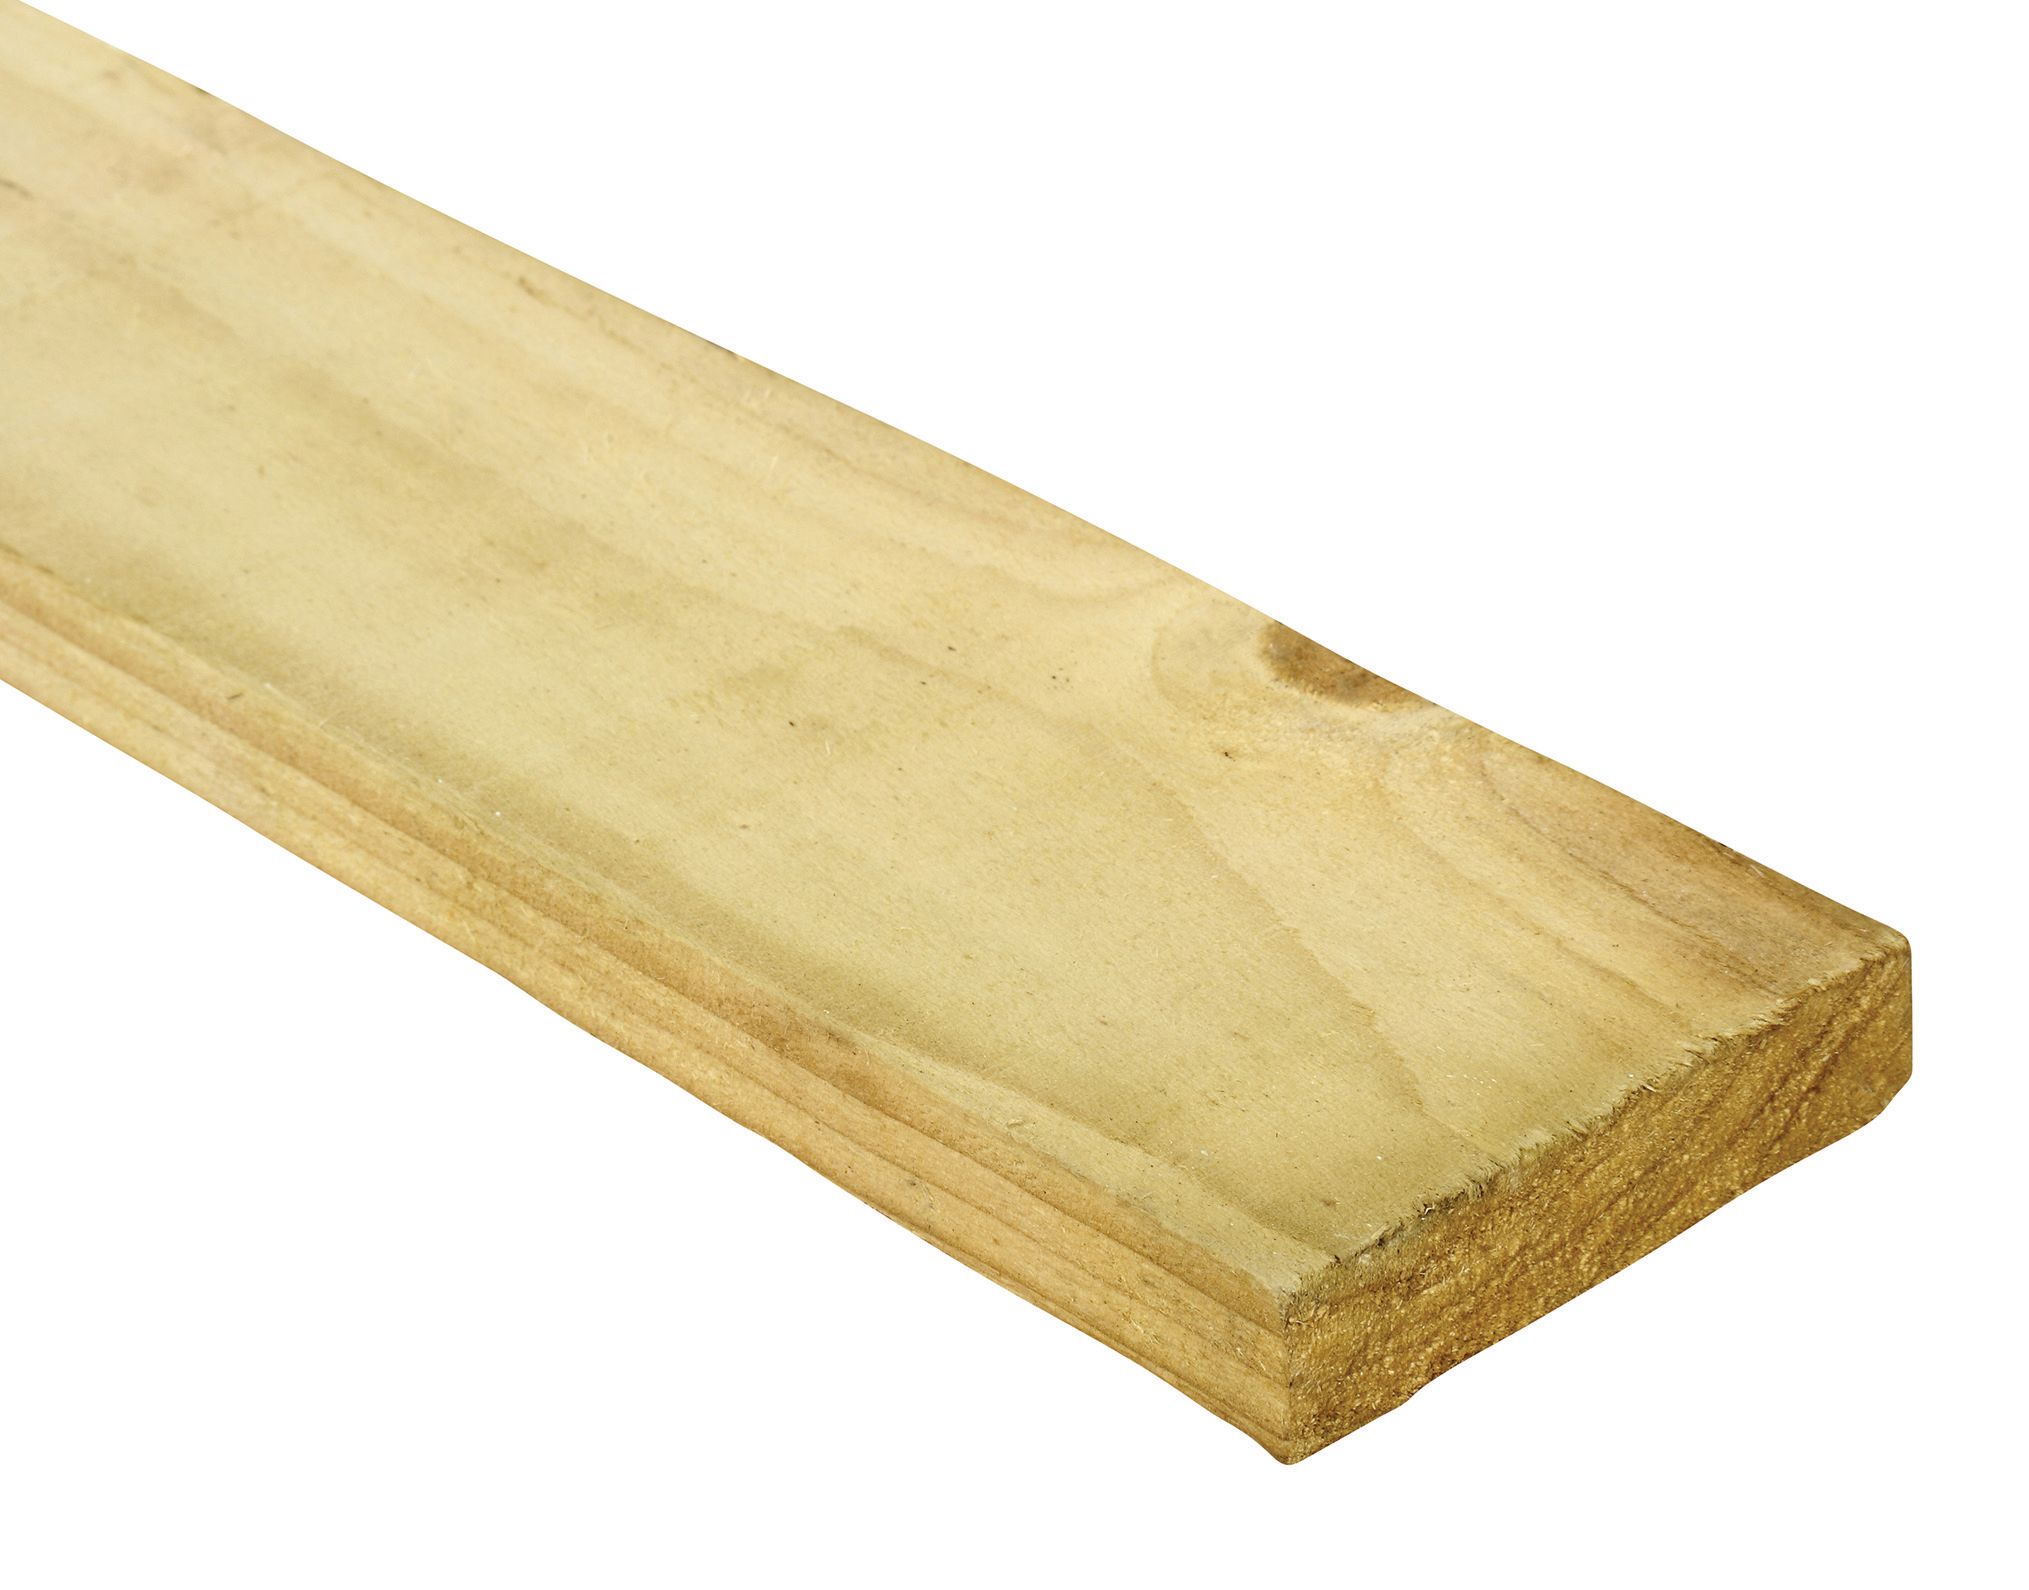 Image of Wickes Treated Sawn Timber - 22 x 100 x 3000mm